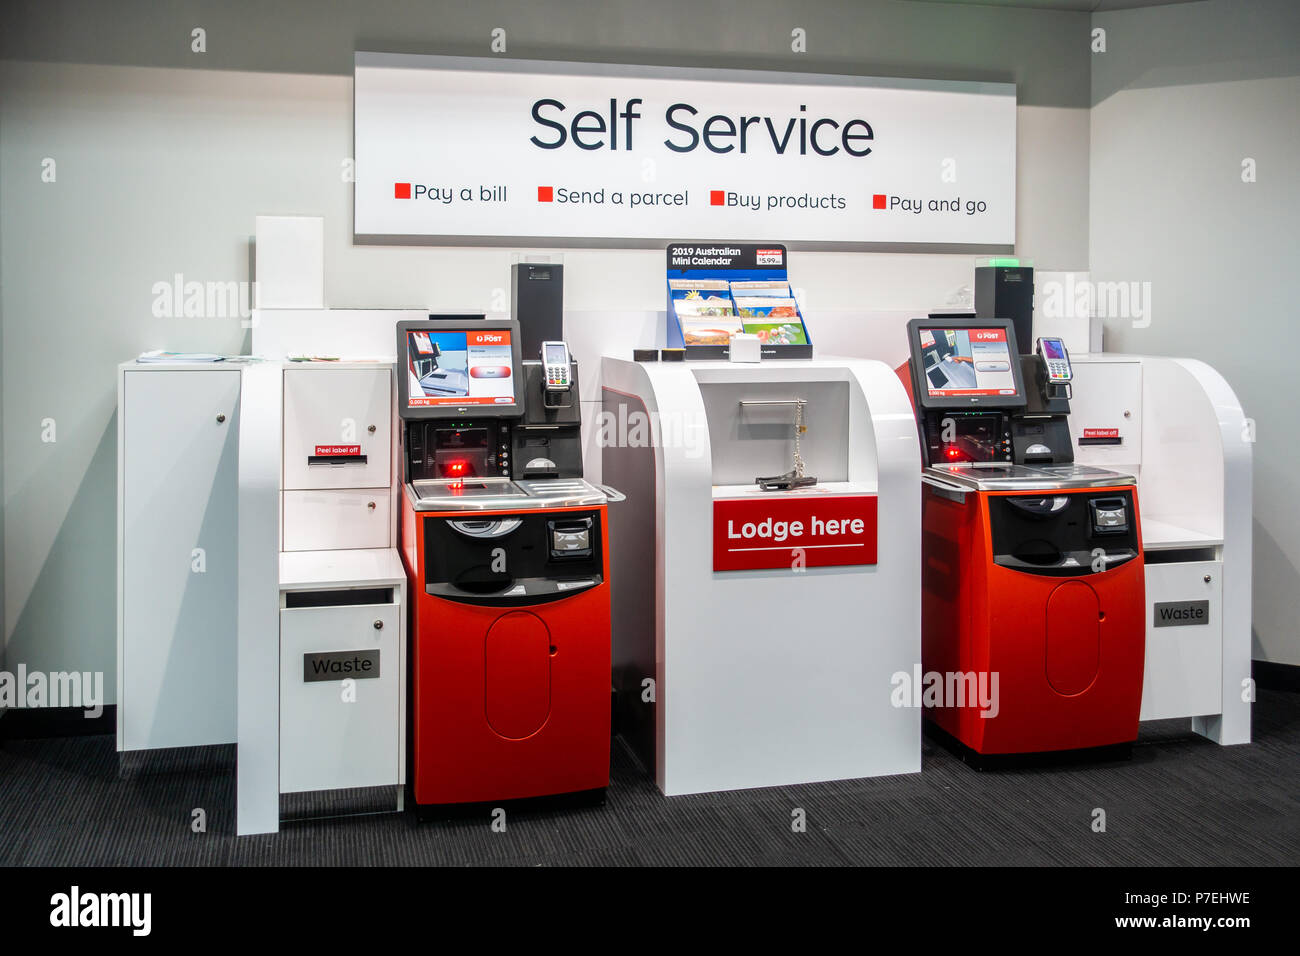 Are there any post offices open on sunday near me Self Service Kiosk Machines In Post Office Of Australia Post Melbourne Vic Australia Stock Photo Alamy